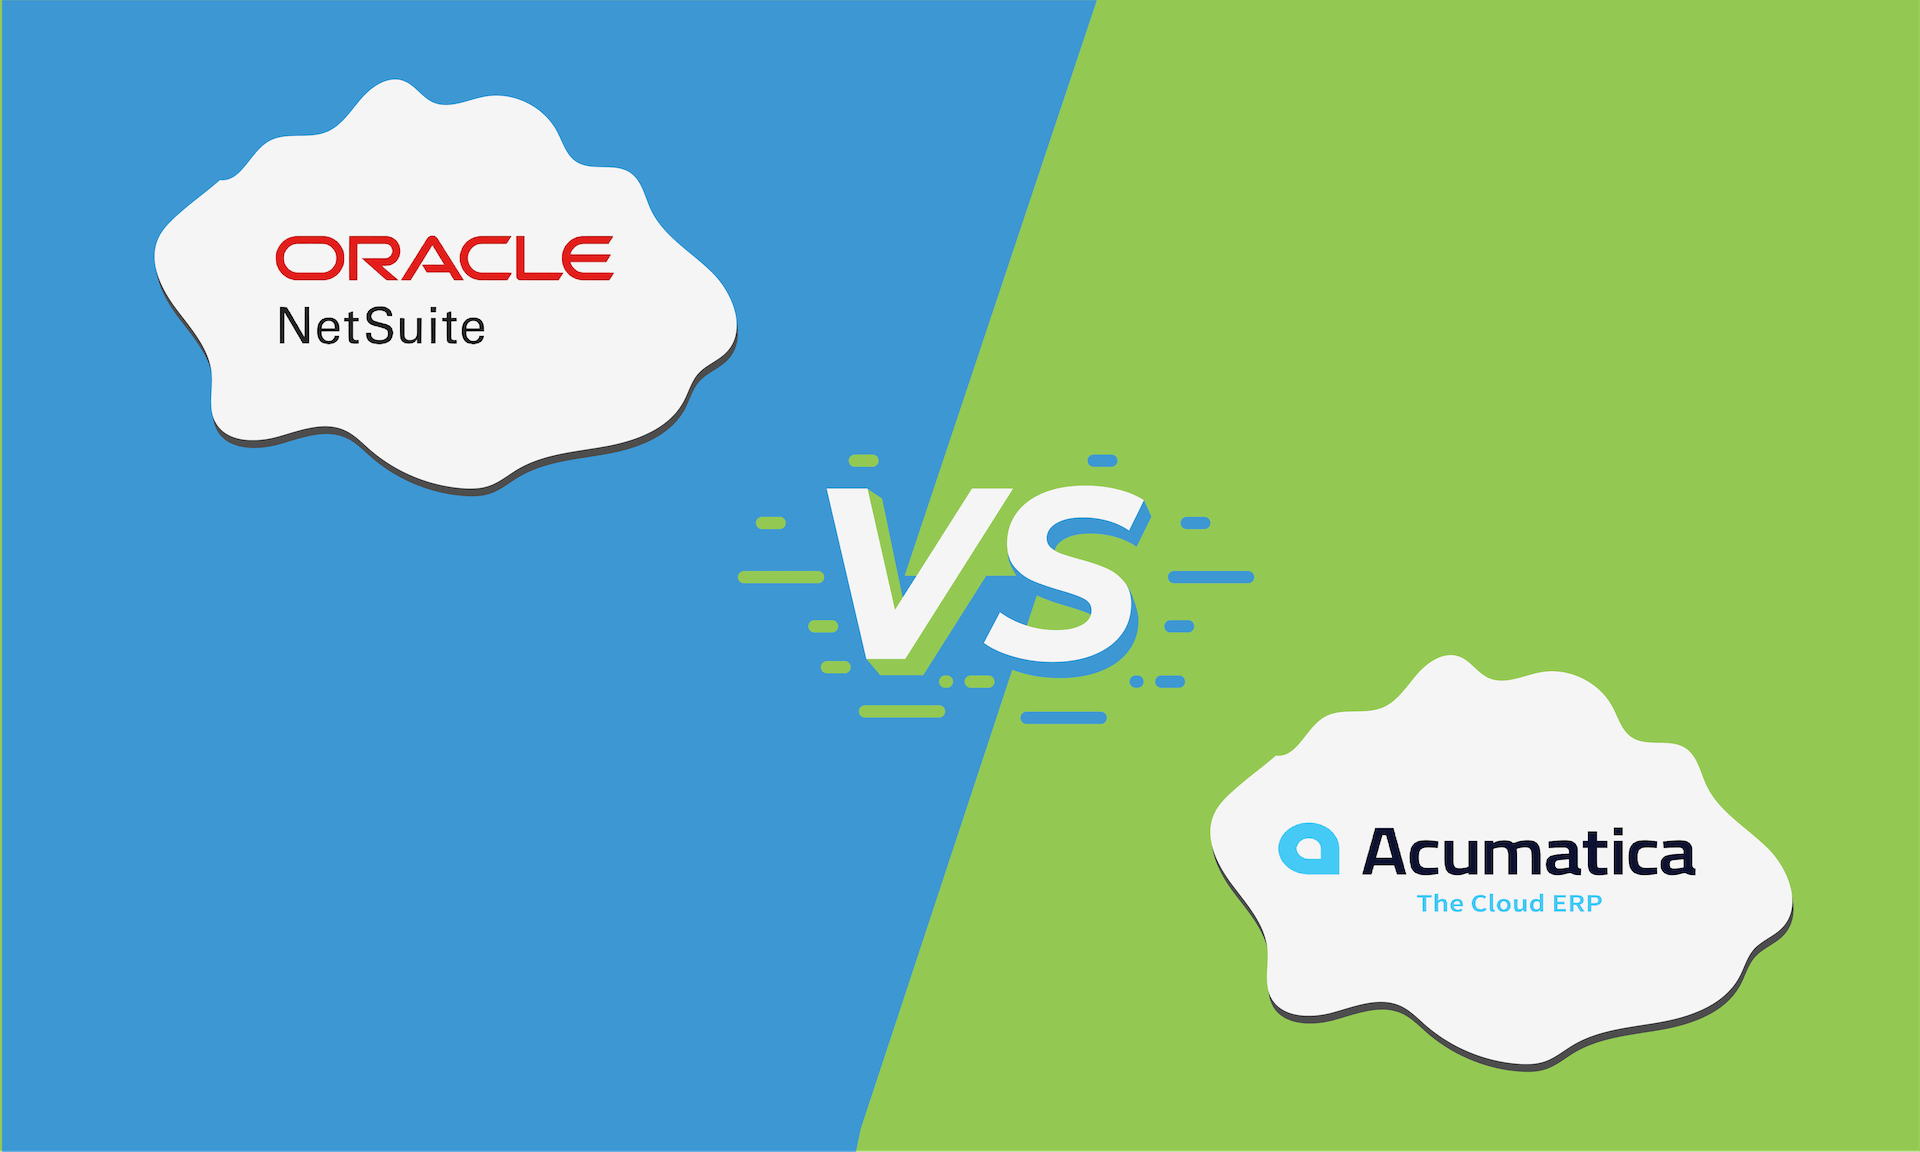 Image of the logos for NetSuite and Acumatica with "vs" in the middle.